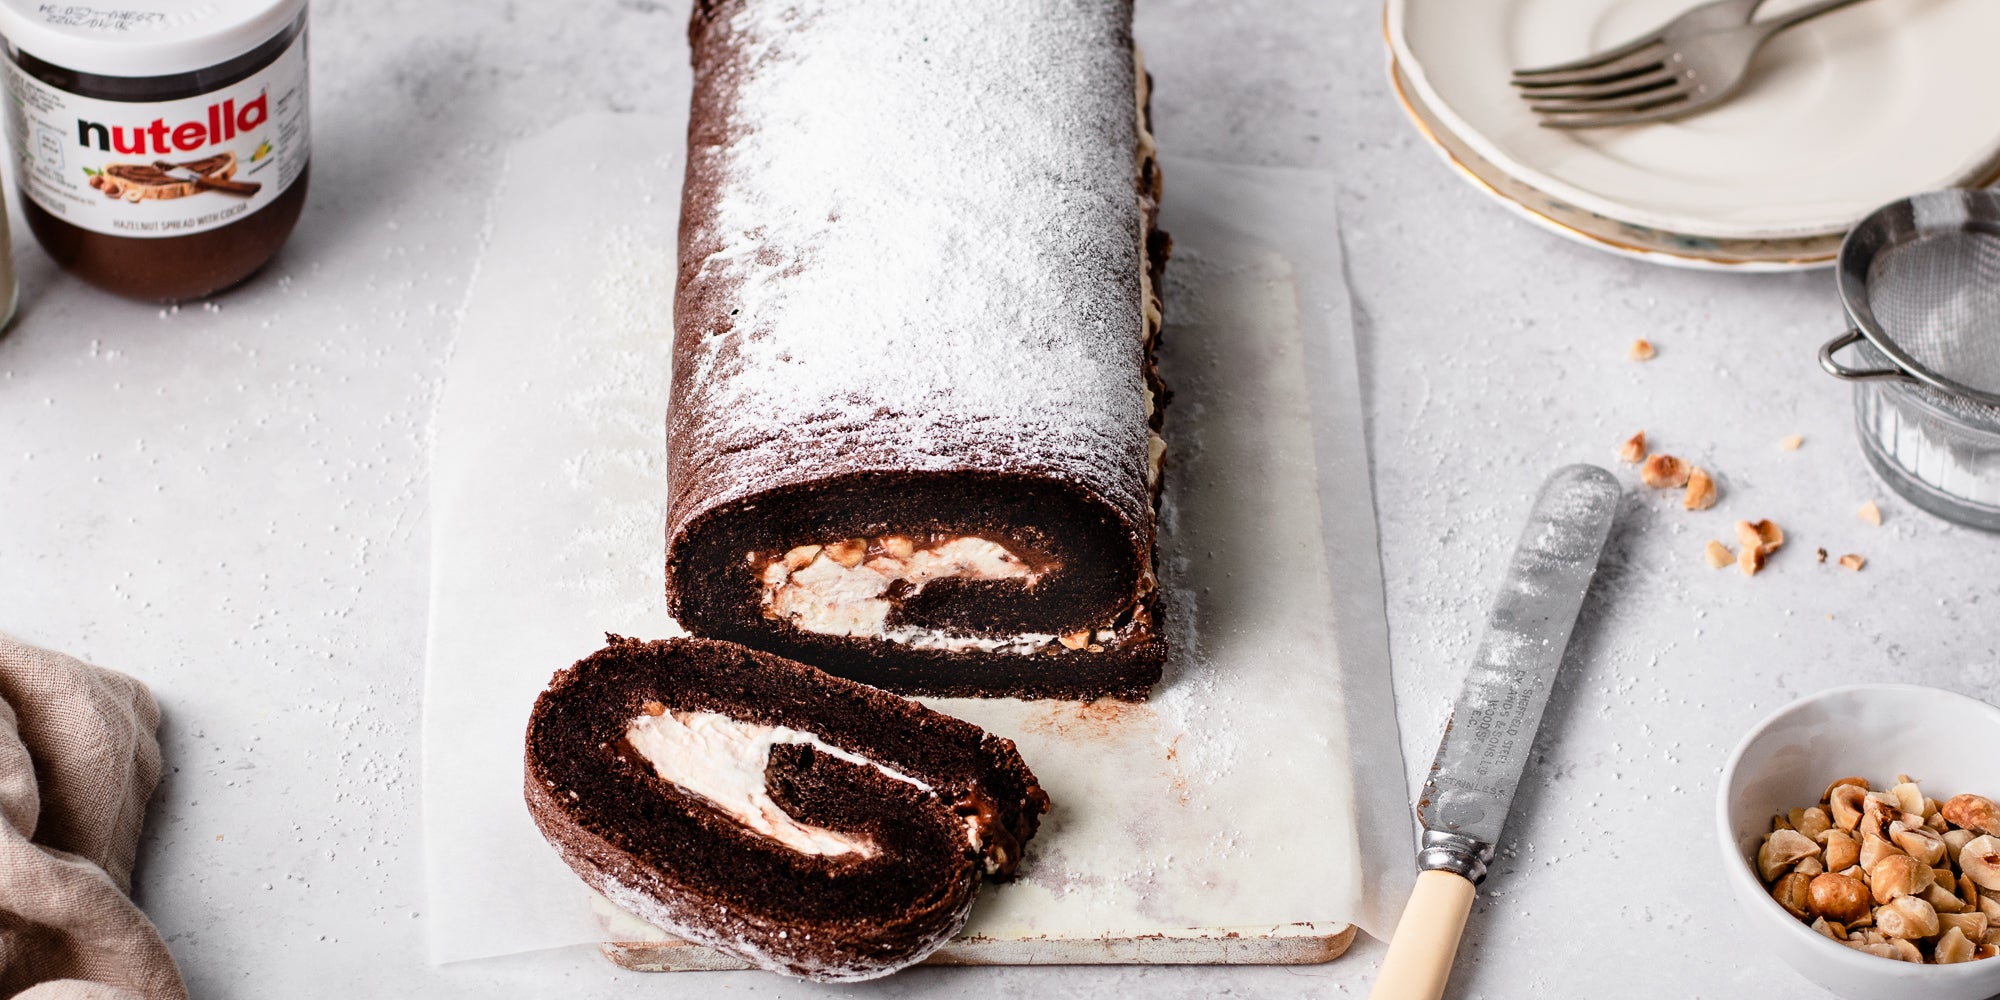 Top view of Chocolate Roulade on a serving board, next to a knife, a bowl of chopped hazelnuts and plates with forks ready to serve